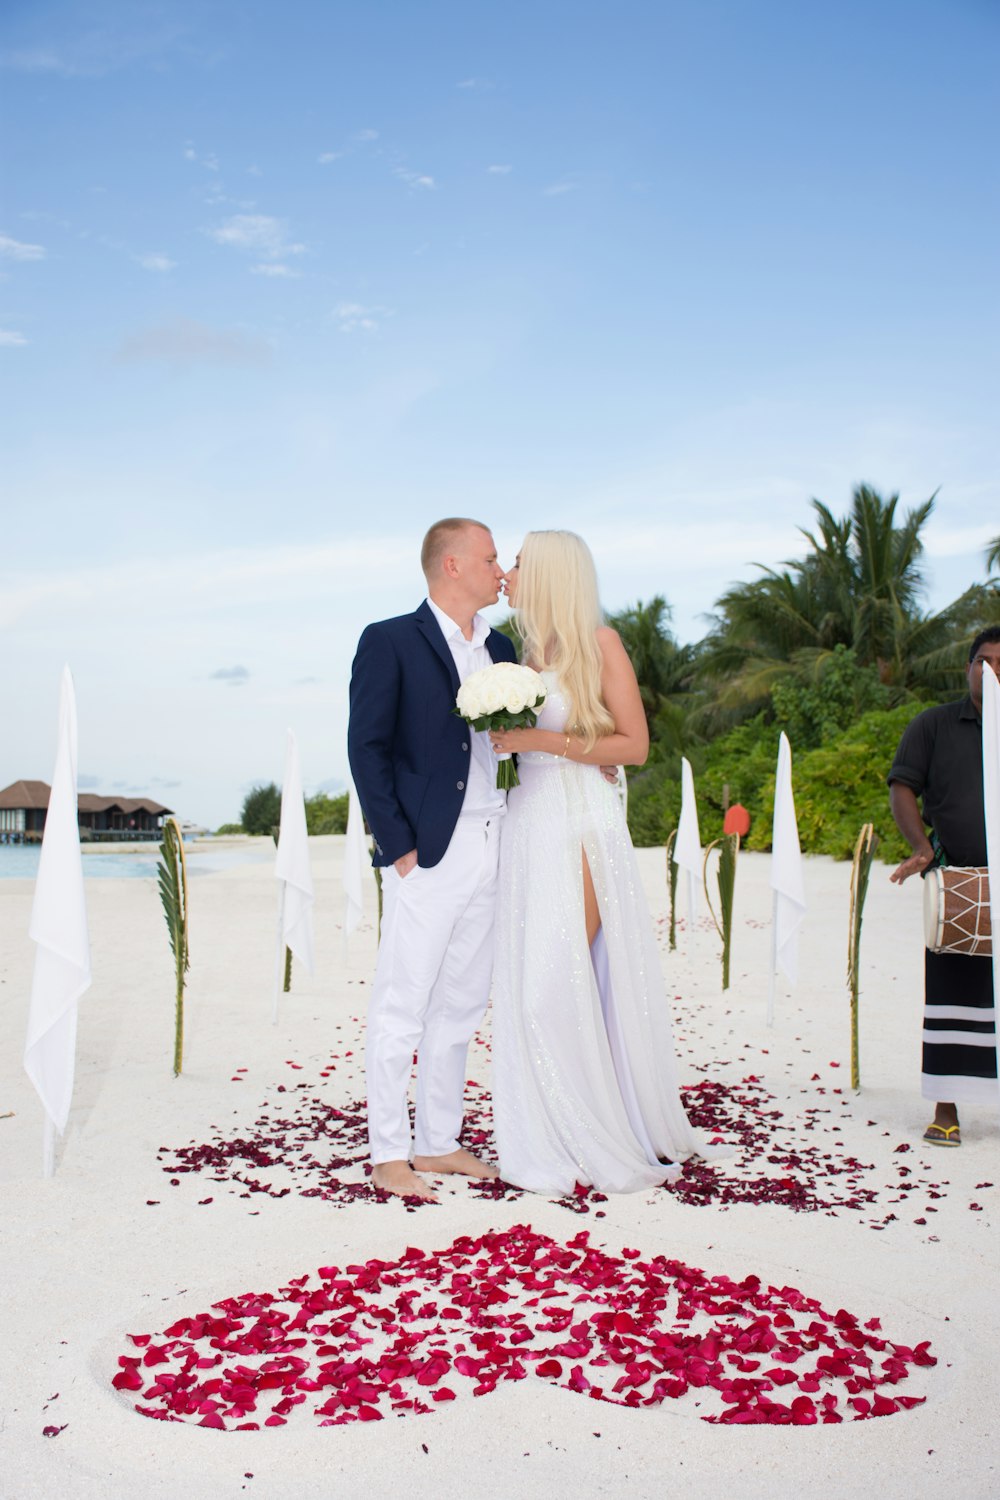 man in black suit and woman in white wedding dress walking on beach during daytime